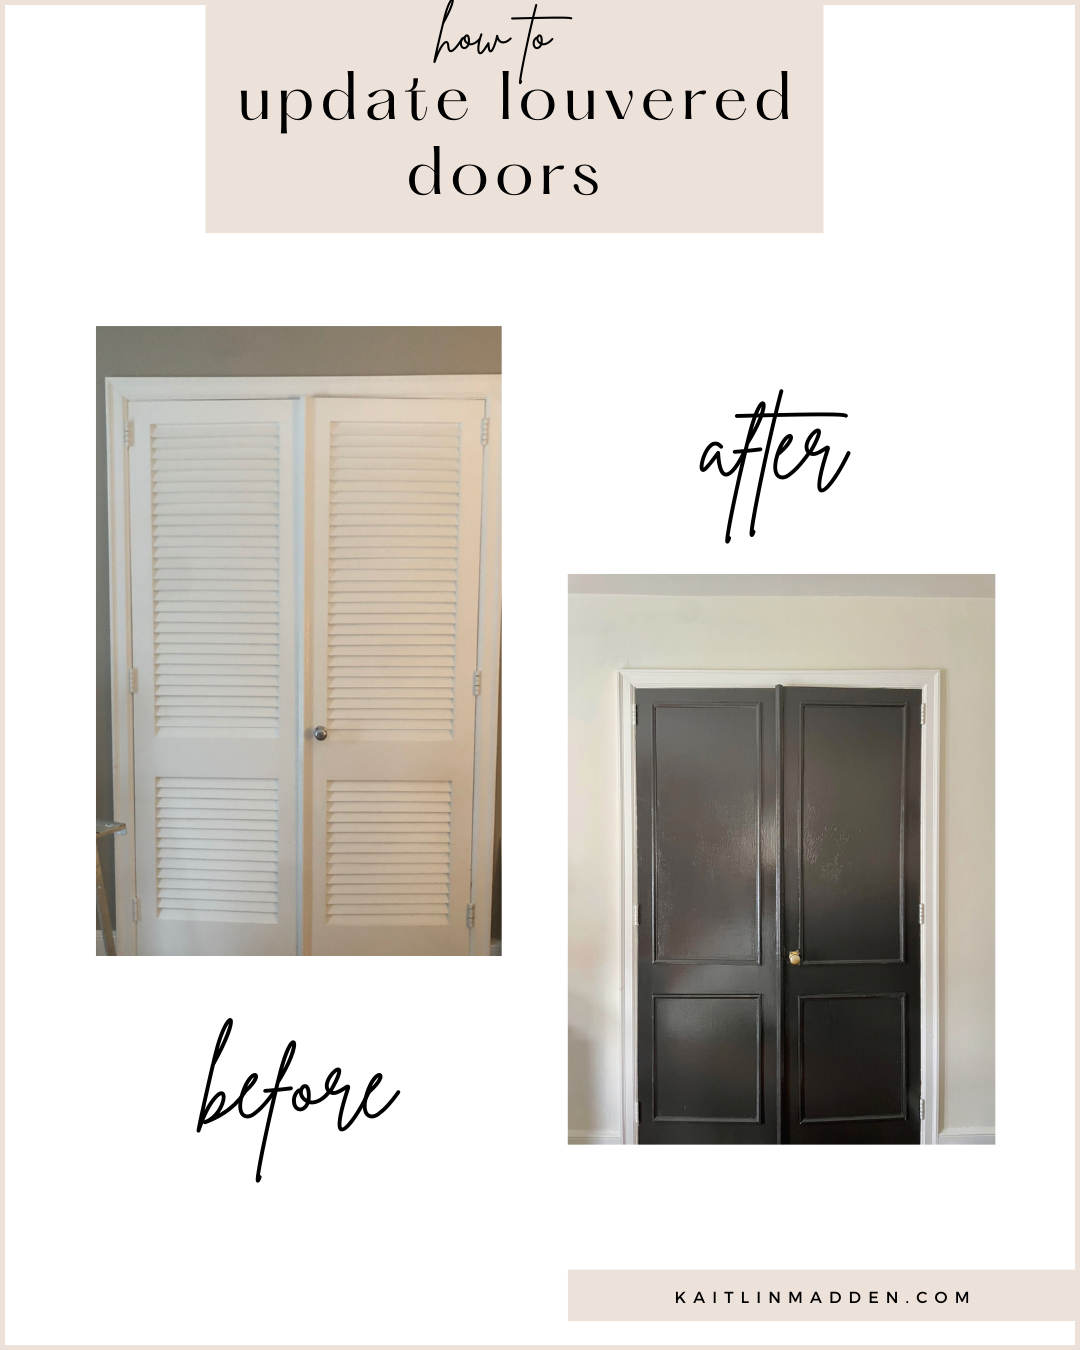 How To Update Louvered Doors for Under $100